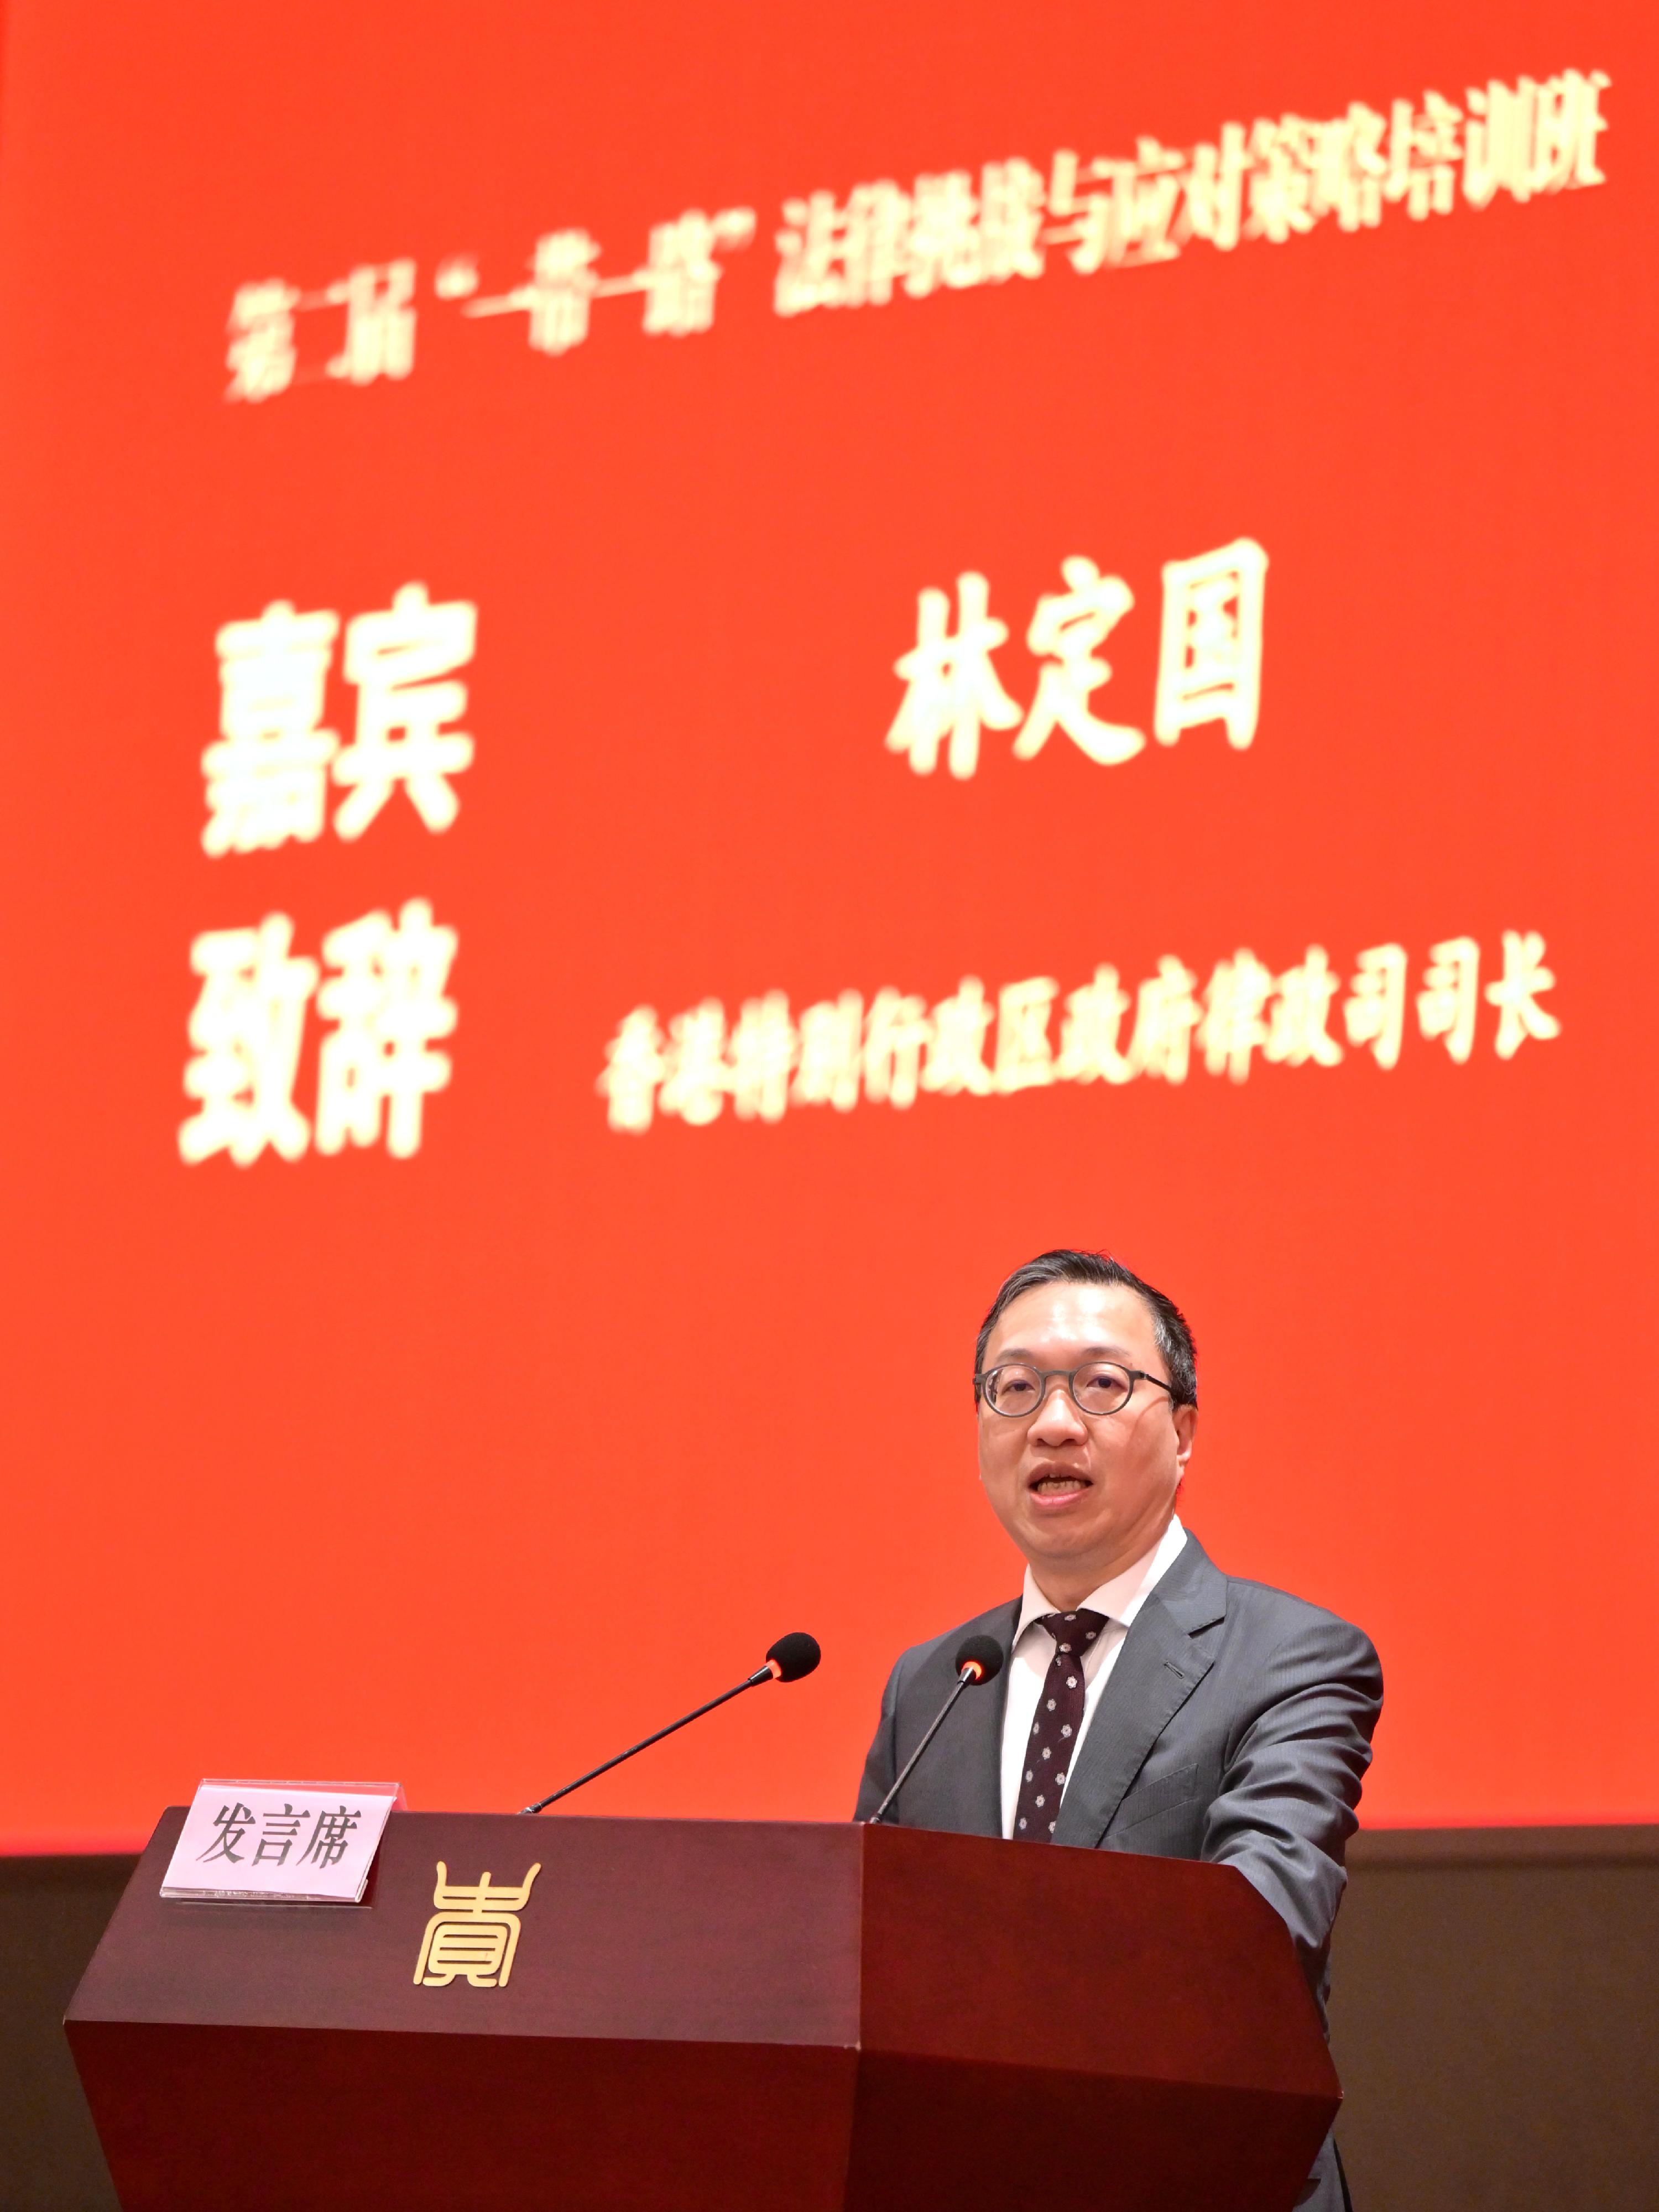 The Secretary for Justice, Mr Paul Lam, SC, led a Hong Kong legal and dispute resolution sector delegation to attend the second seminar on the legal challenges and coping strategies under the Belt and Road Initiative organised by the State-owned Assets Supervision and Administration Commission of the State Council and co-organised by the Department of Treaty and Law of the Ministry of Commerce and the Department of Justice today (August 25) in Beijing. Photo shows Mr Lam delivering his opening remarks.